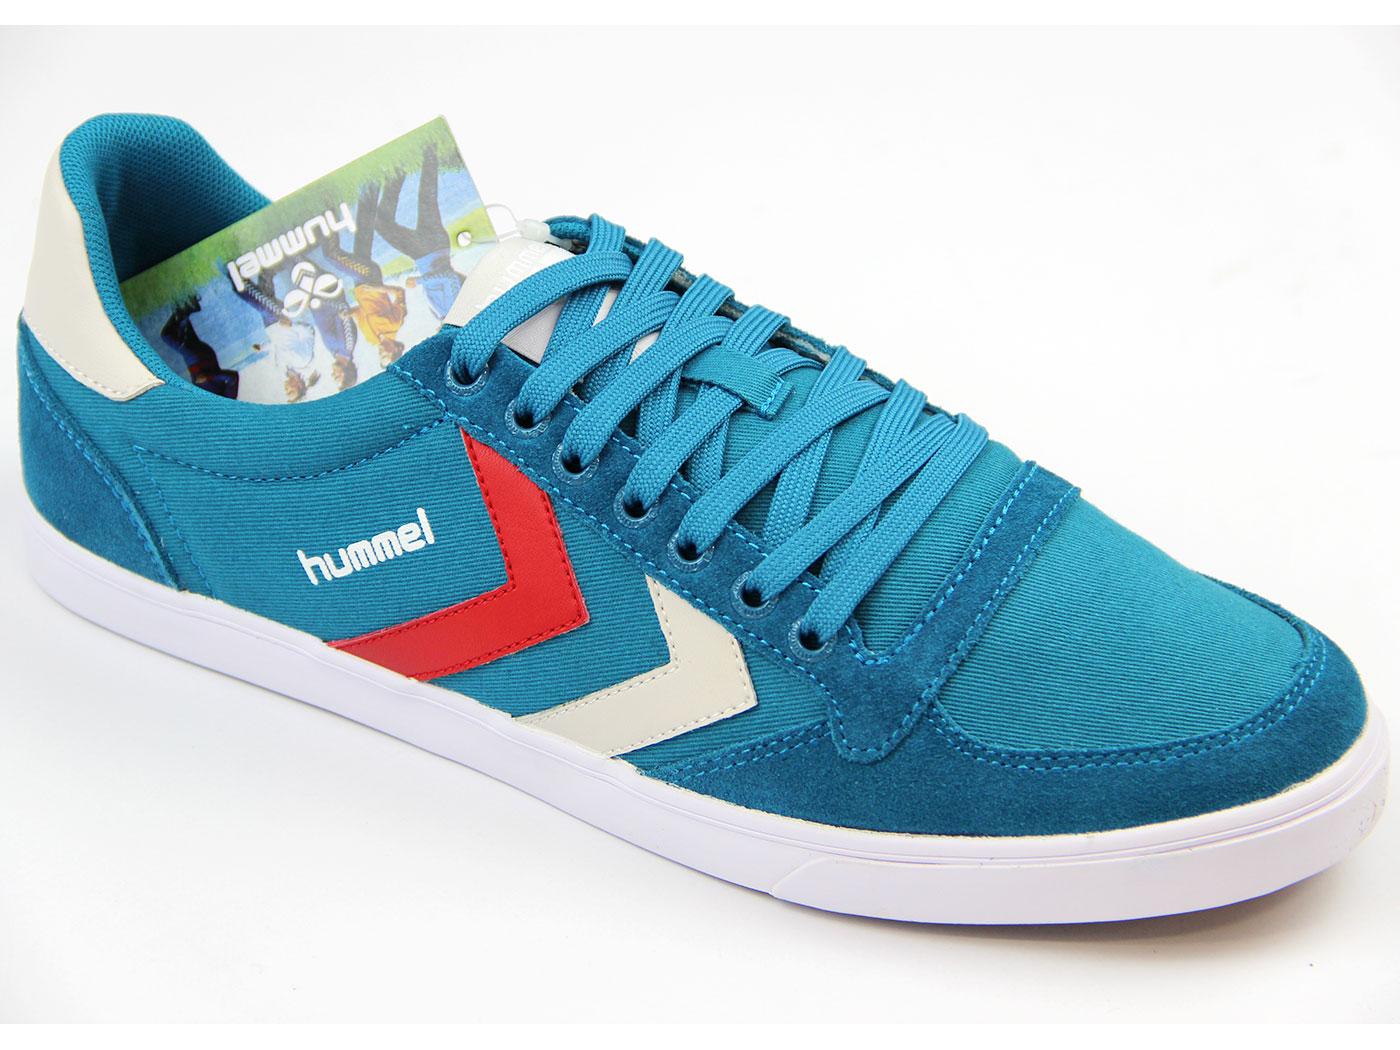 Retro Slimmer Stadil Low Canvas Trainers